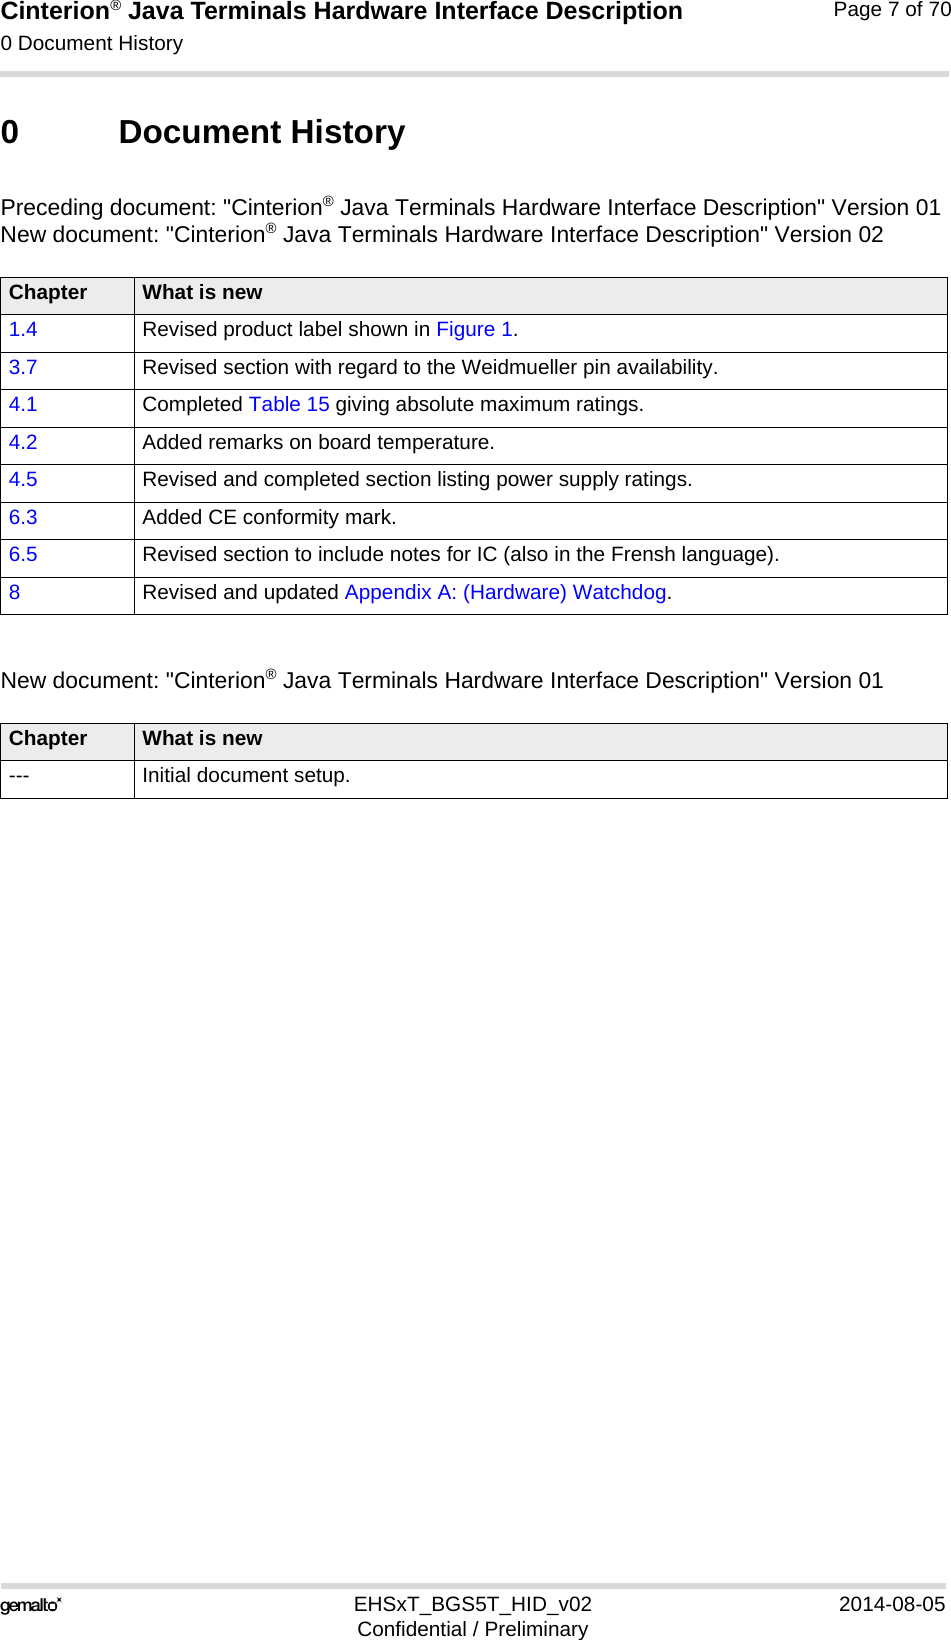 Cinterion® Java Terminals Hardware Interface Description0 Document History7EHSxT_BGS5T_HID_v02 2014-08-05Confidential / PreliminaryPage 7 of 700 Document HistoryPreceding document: &quot;Cinterion® Java Terminals Hardware Interface Description&quot; Version 01New document: &quot;Cinterion® Java Terminals Hardware Interface Description&quot; Version 02New document: &quot;Cinterion® Java Terminals Hardware Interface Description&quot; Version 01Chapter What is new1.4 Revised product label shown in Figure 1.3.7 Revised section with regard to the Weidmueller pin availability.4.1 Completed Table 15 giving absolute maximum ratings.4.2 Added remarks on board temperature.4.5 Revised and completed section listing power supply ratings.6.3 Added CE conformity mark.6.5 Revised section to include notes for IC (also in the Frensh language).8Revised and updated Appendix A: (Hardware) Watchdog.Chapter What is new--- Initial document setup.